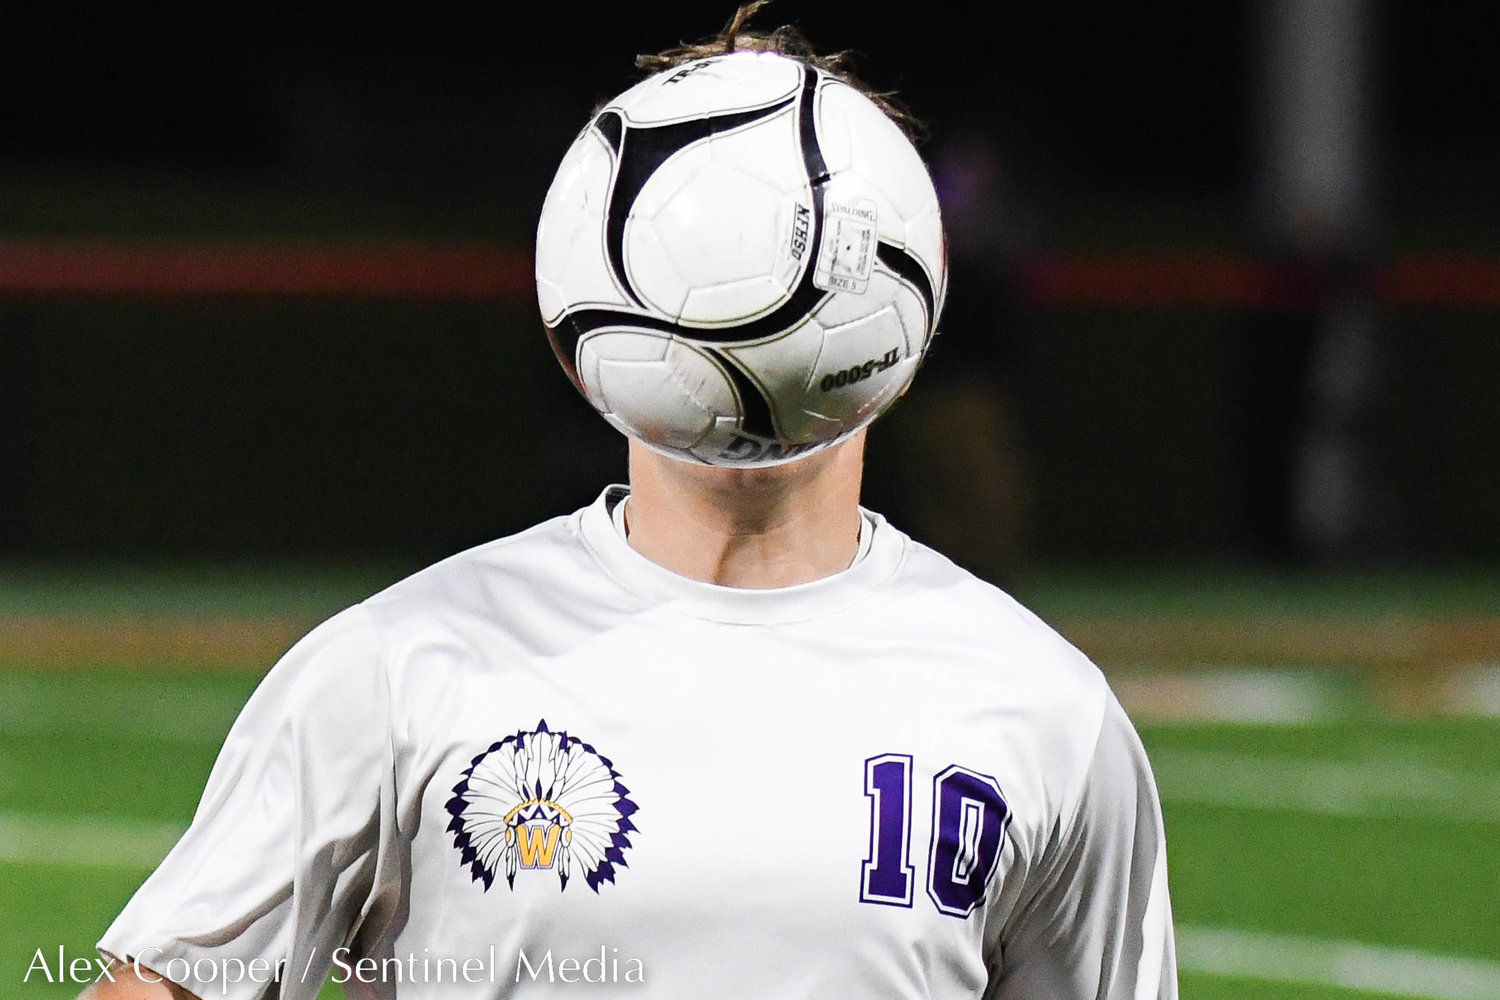 Waterville player Connor Stanton (10) attempts to settle the ball during the Section III Class C final against Cooperstown on Tuesday, Nov. 1 at VVS High School. Cooperstown won 1-0 in overtime.